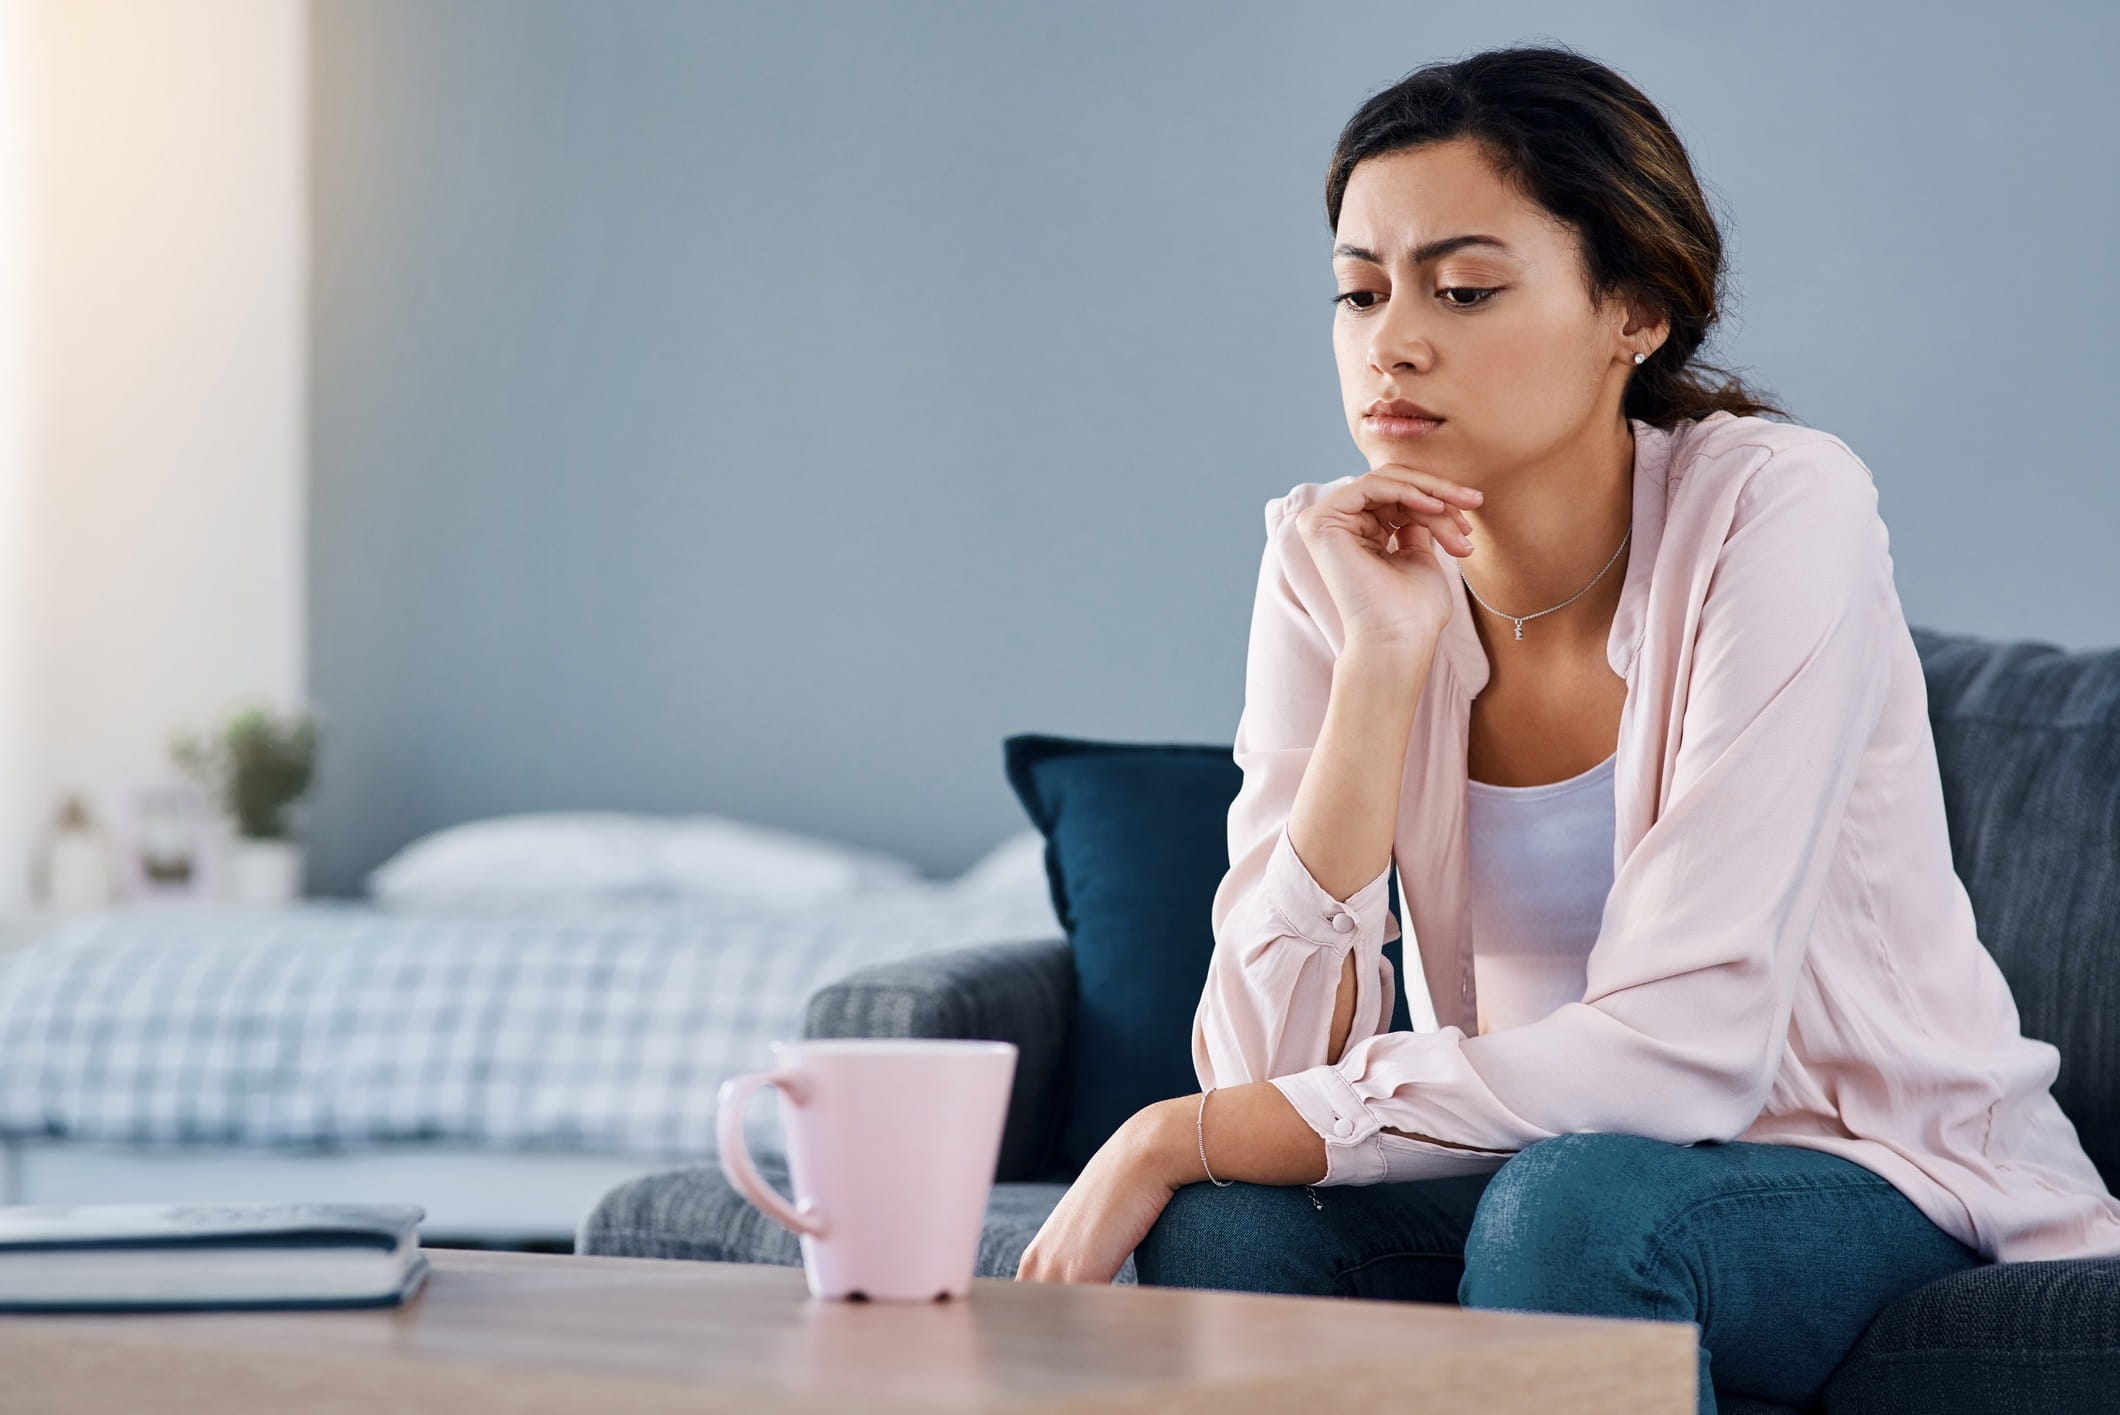 Woman sitting alone and looking stressed